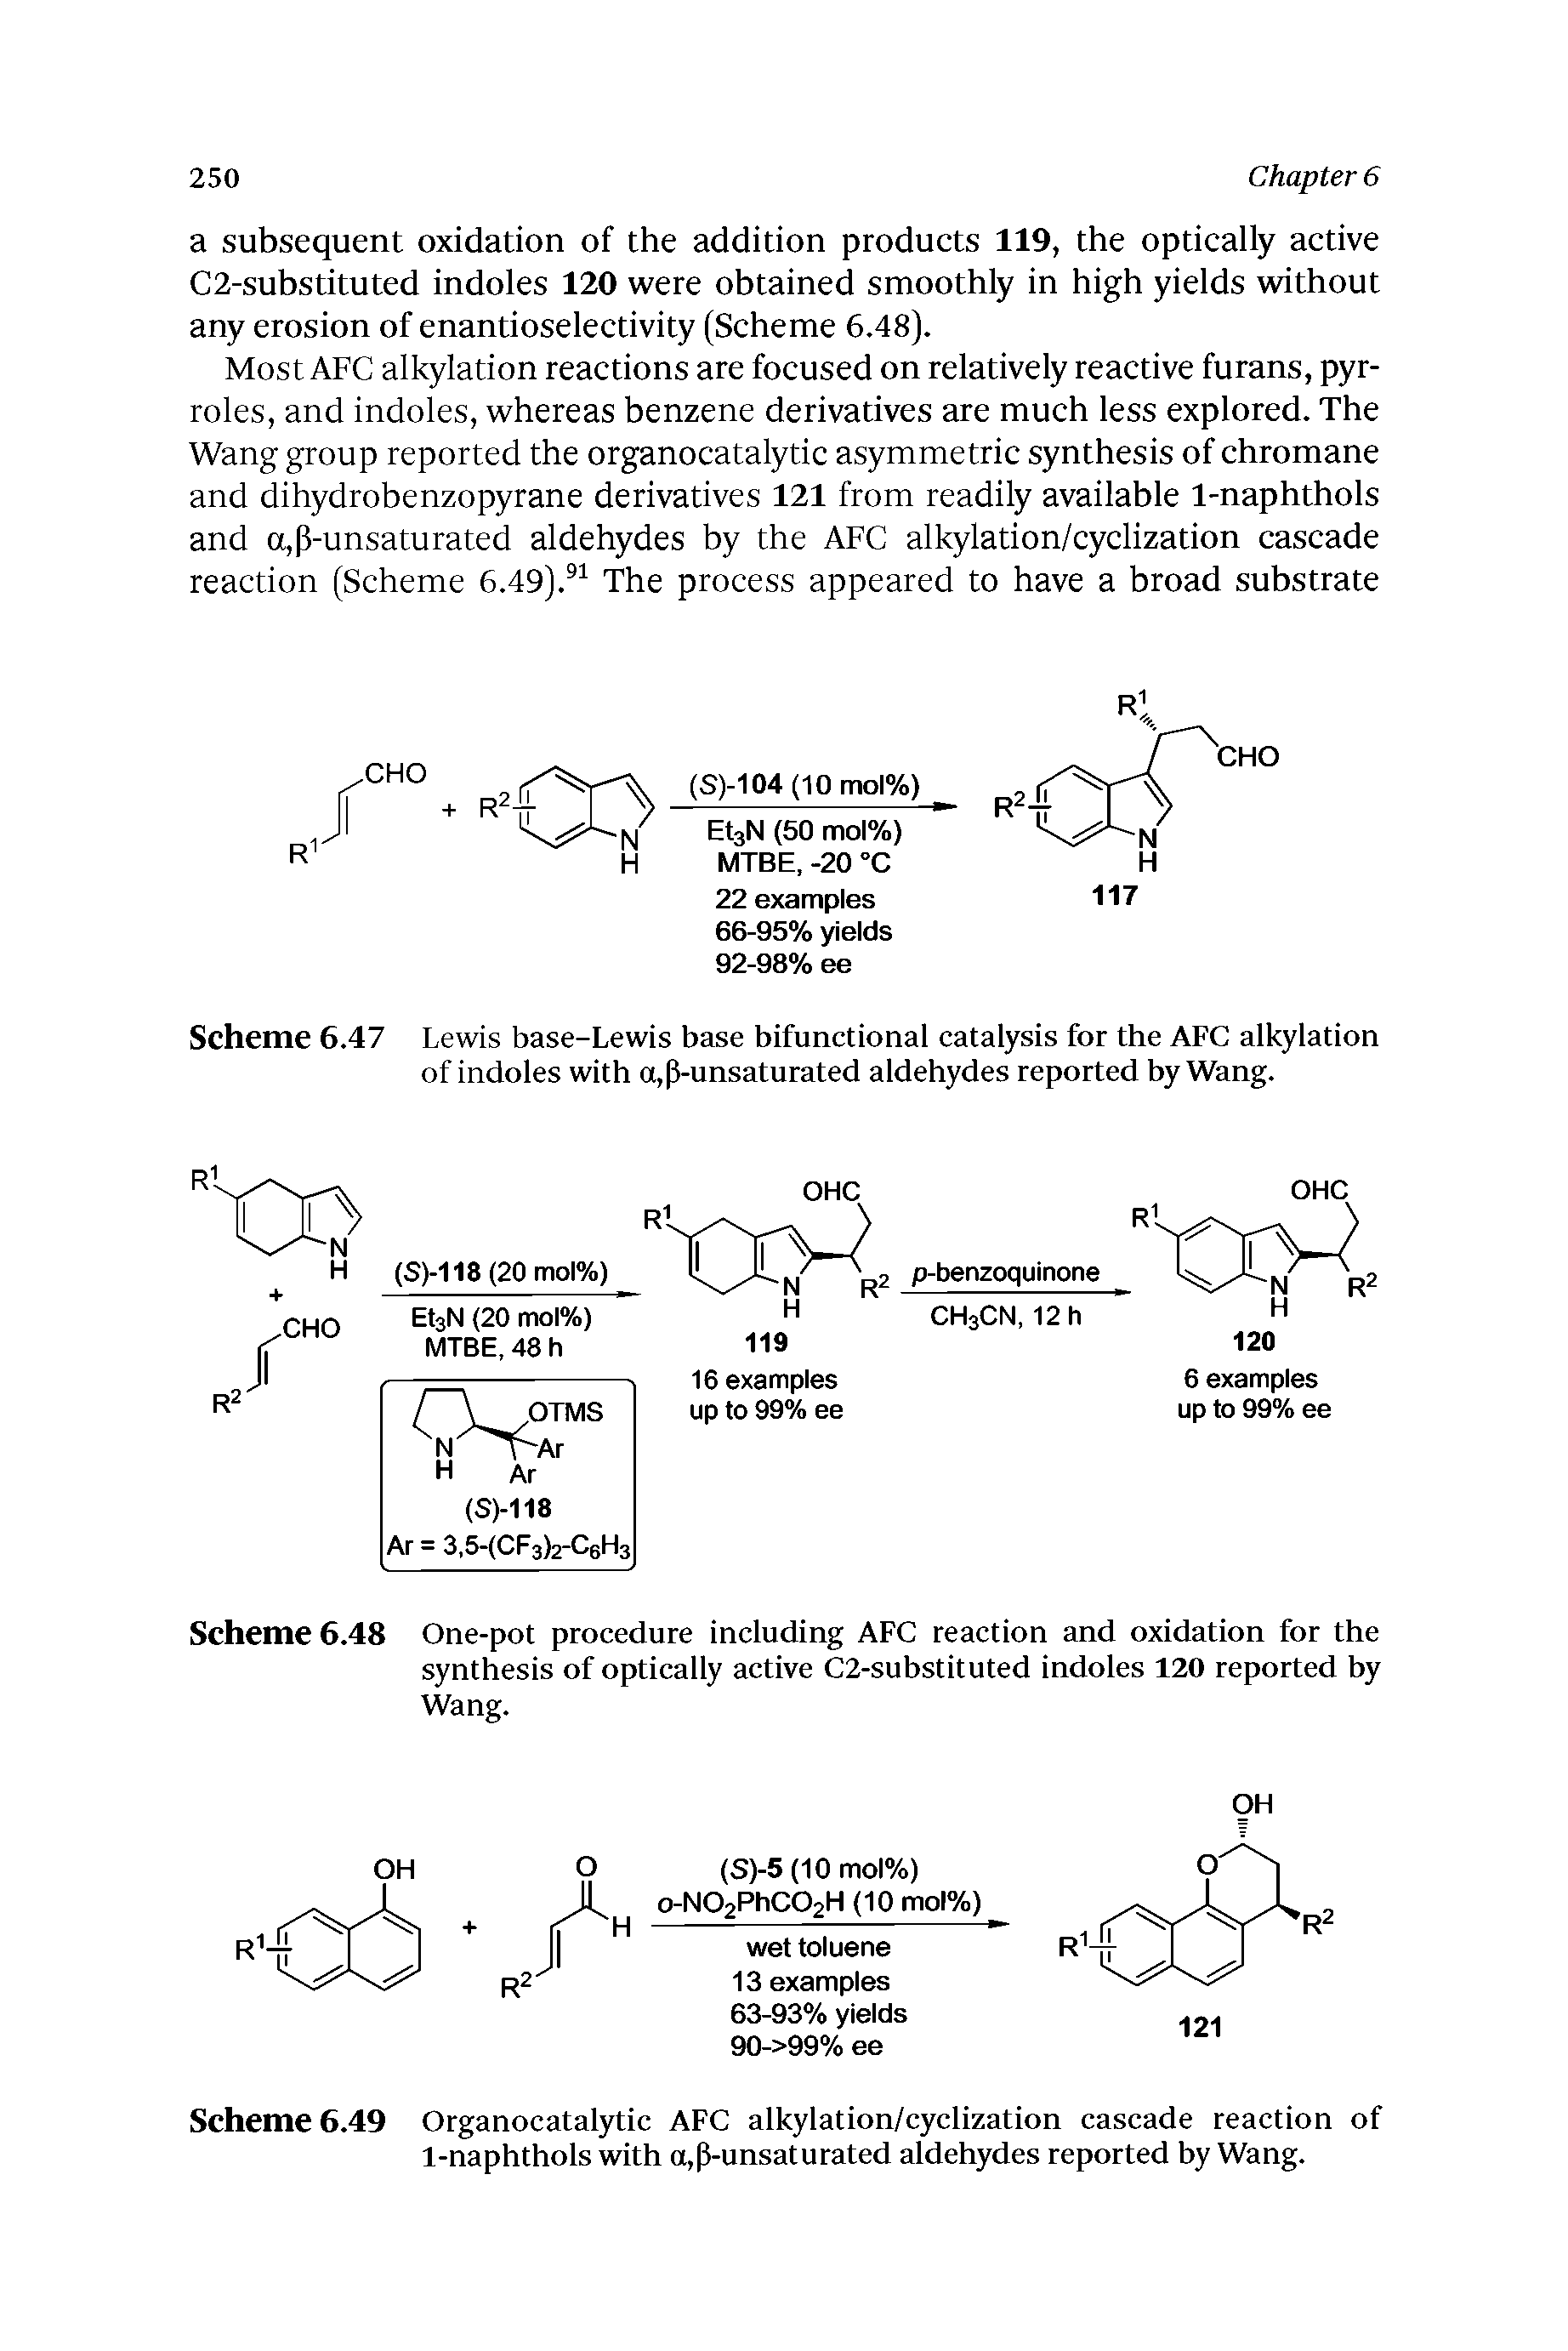 Scheme 6.49 Organocatalytic AFC alkylation/cyclization cascade reaction of 1-naphthols with o,p-unsaturated aldehydes reported by Wang.